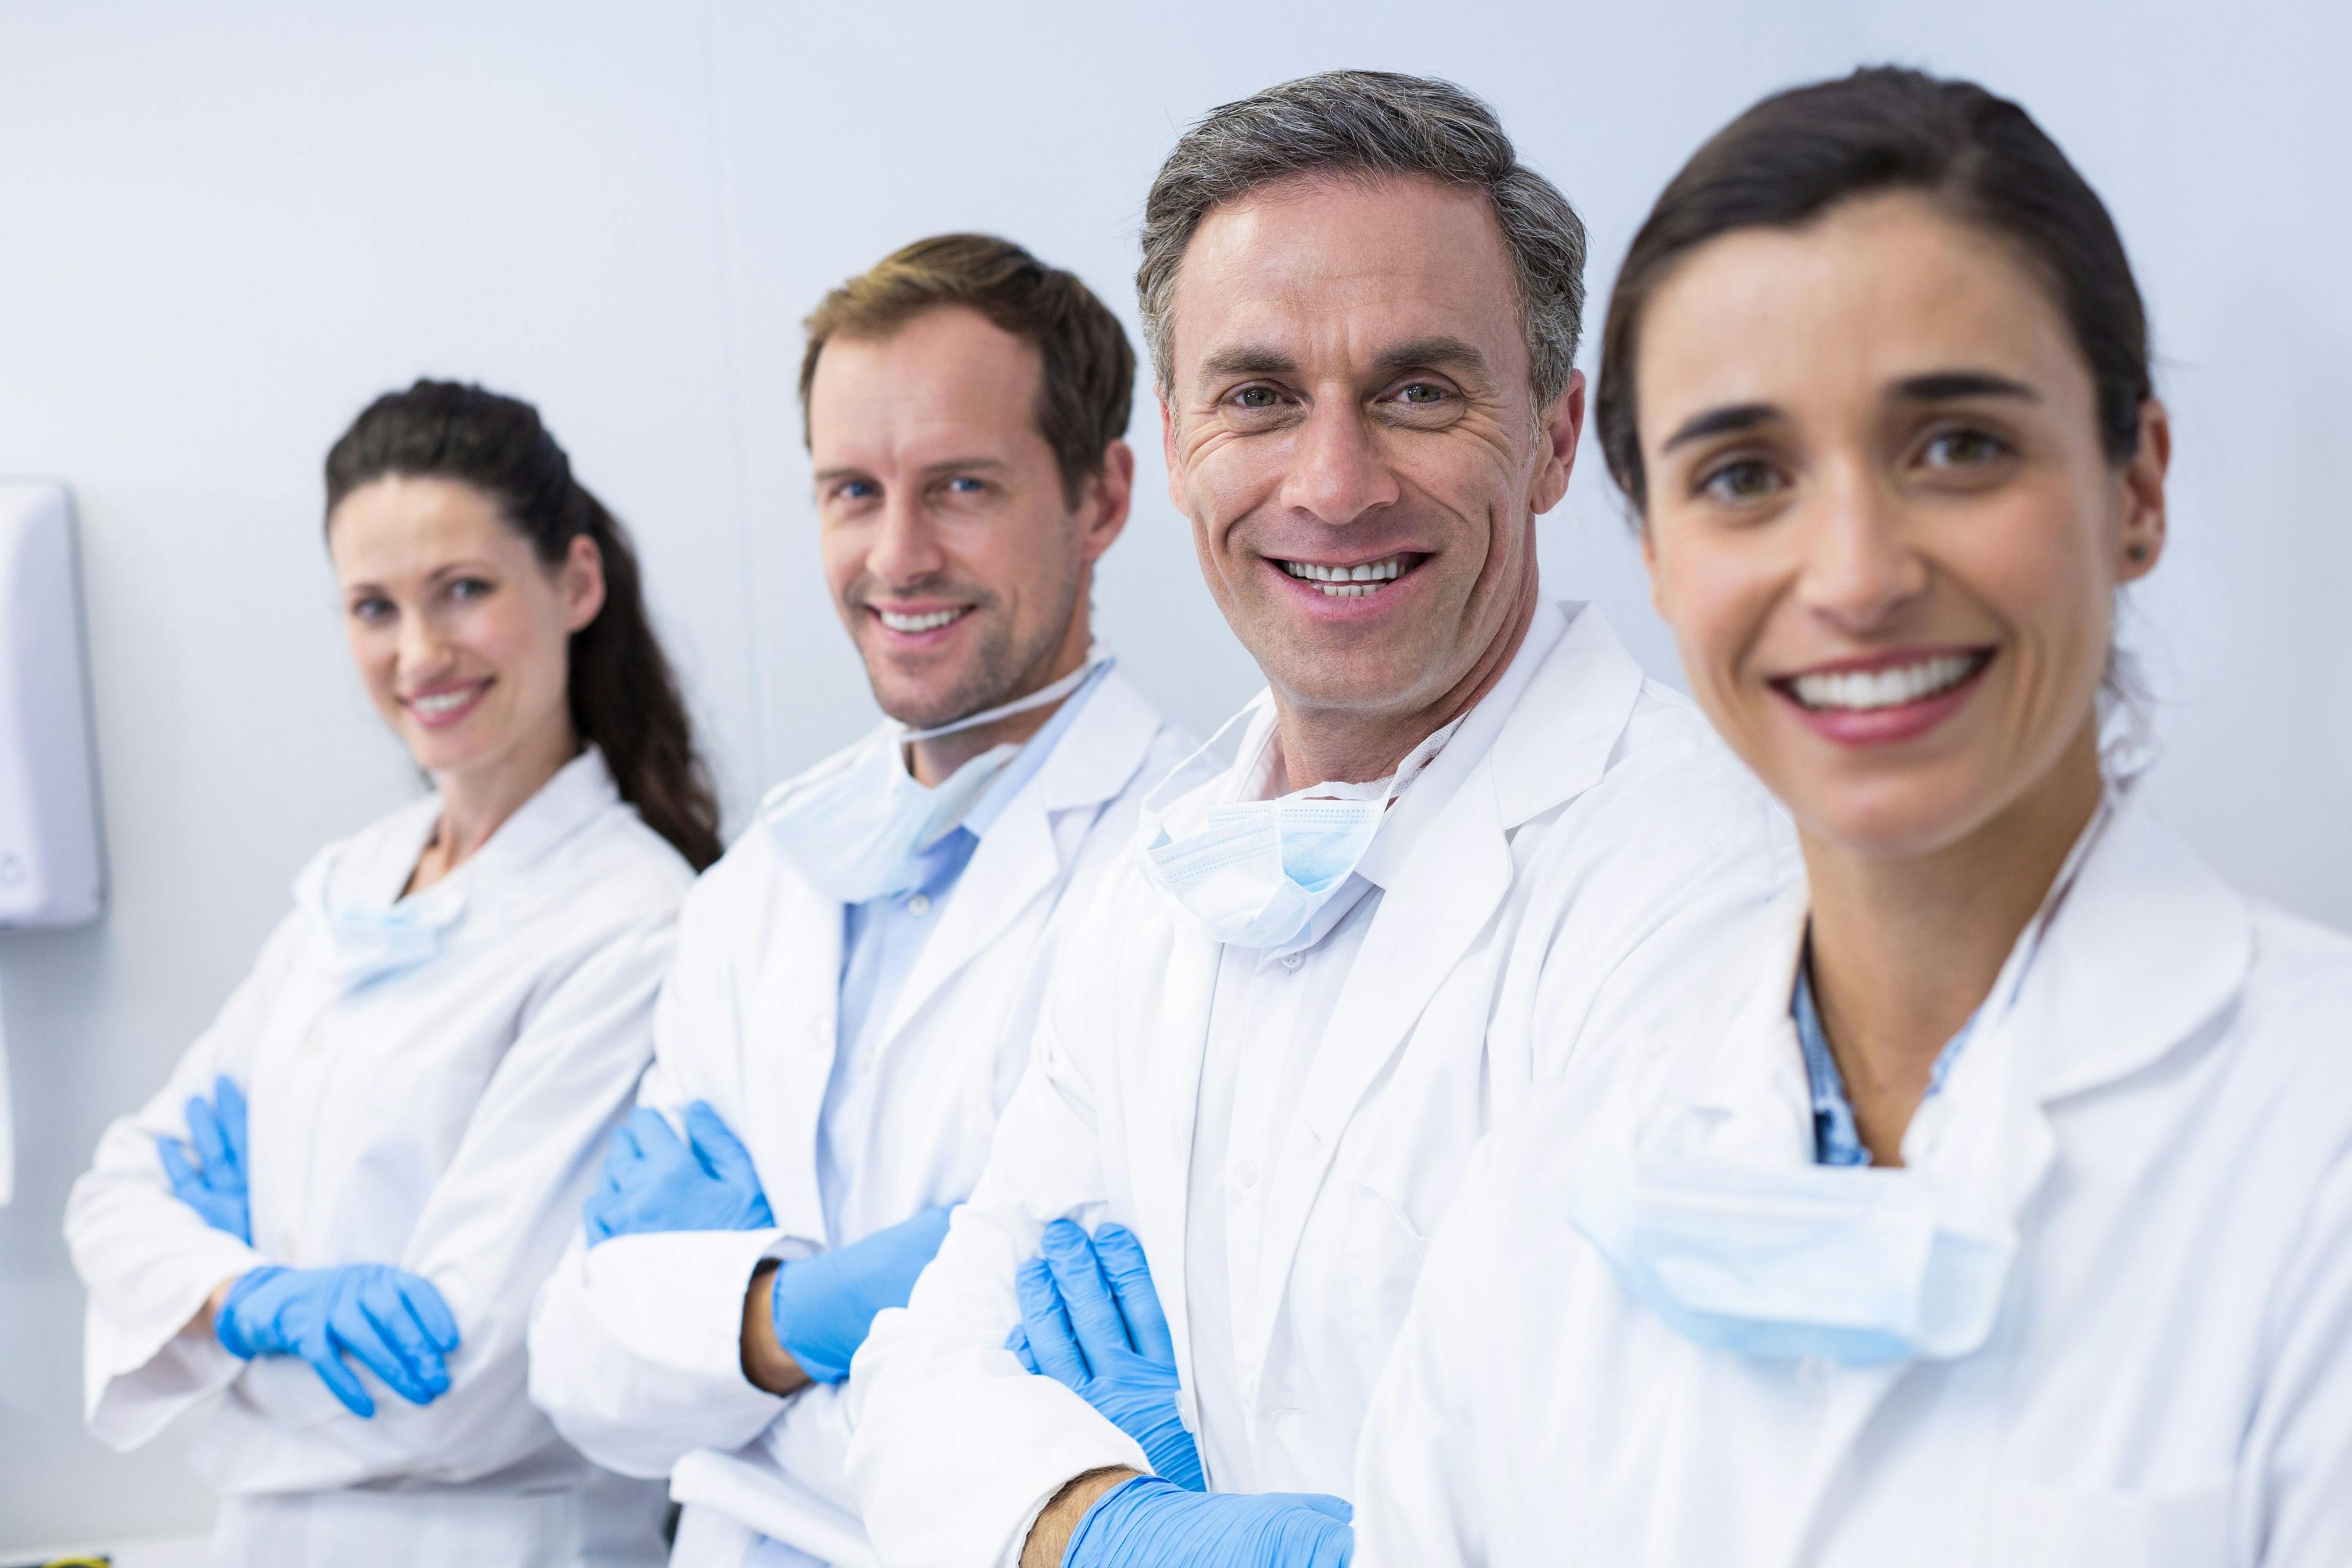 Three Ways Dentists Can Capitalize on Industry Optimism